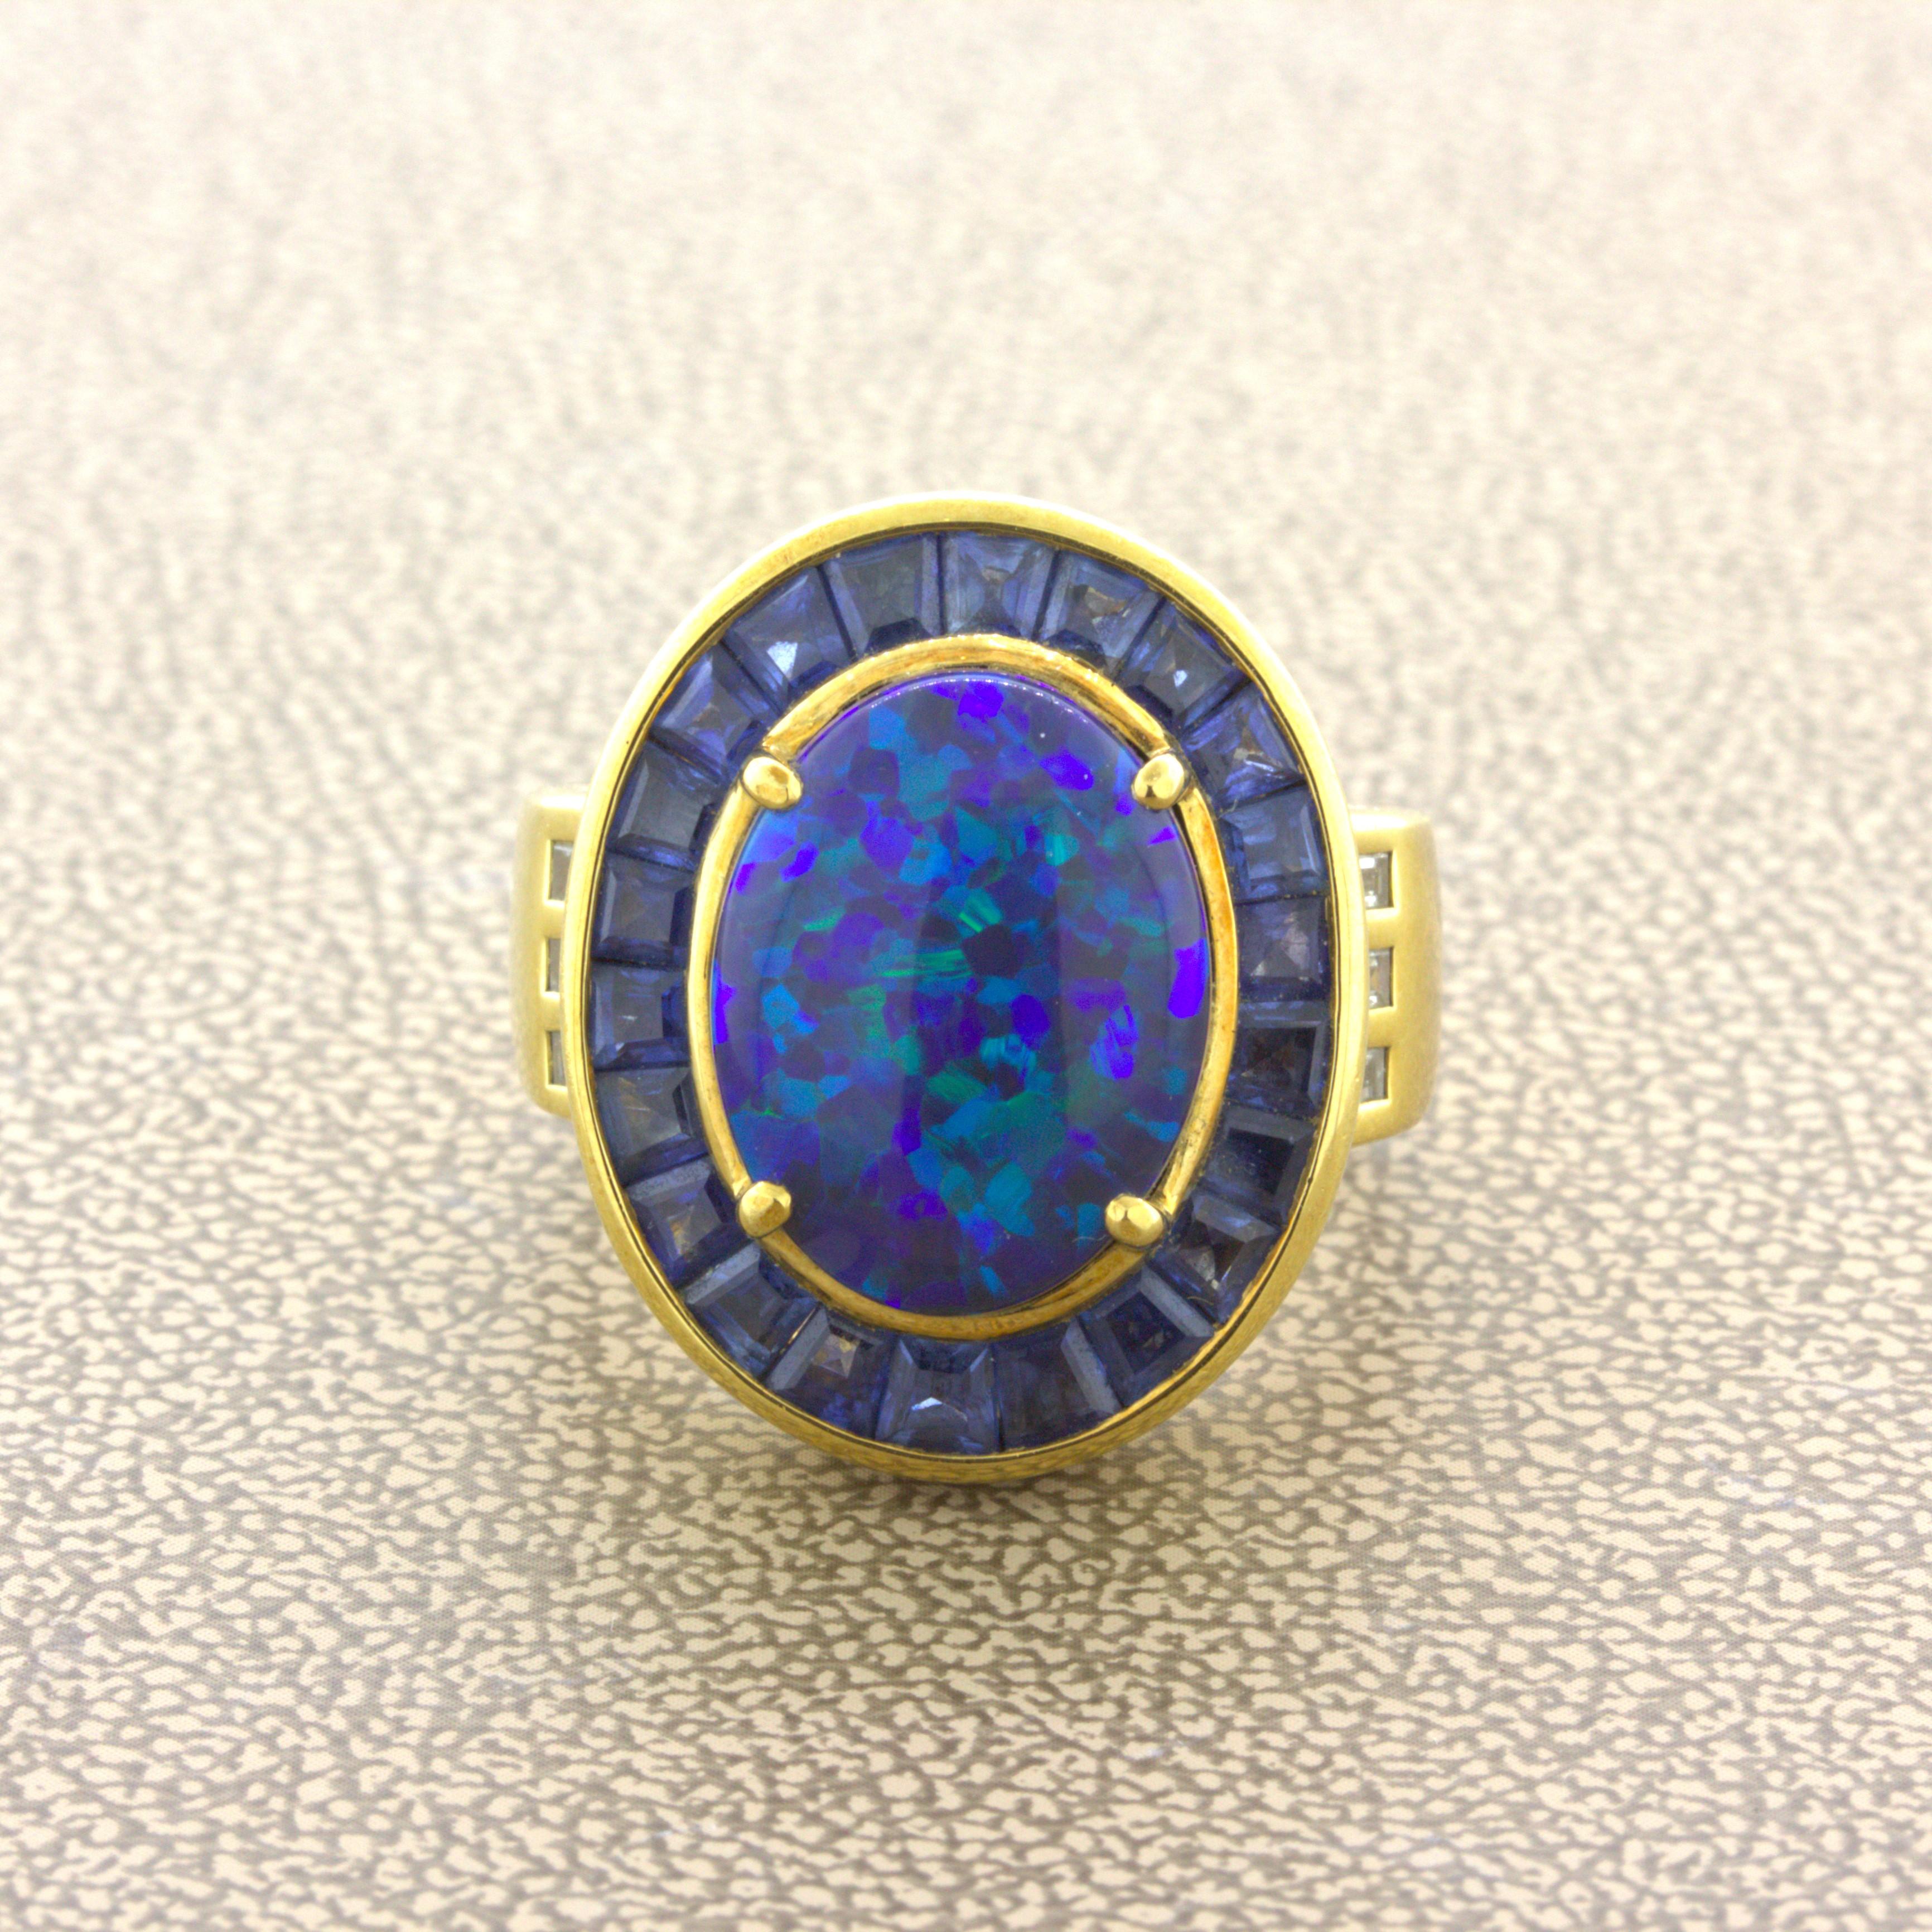 A lovely natural black Australian opal set in the middle of a unique yellow gold ring. The opal weighs 6.87 carats and has a classic blue-green play-of-color. There are various shades of blue and green which flash brightly across the black body